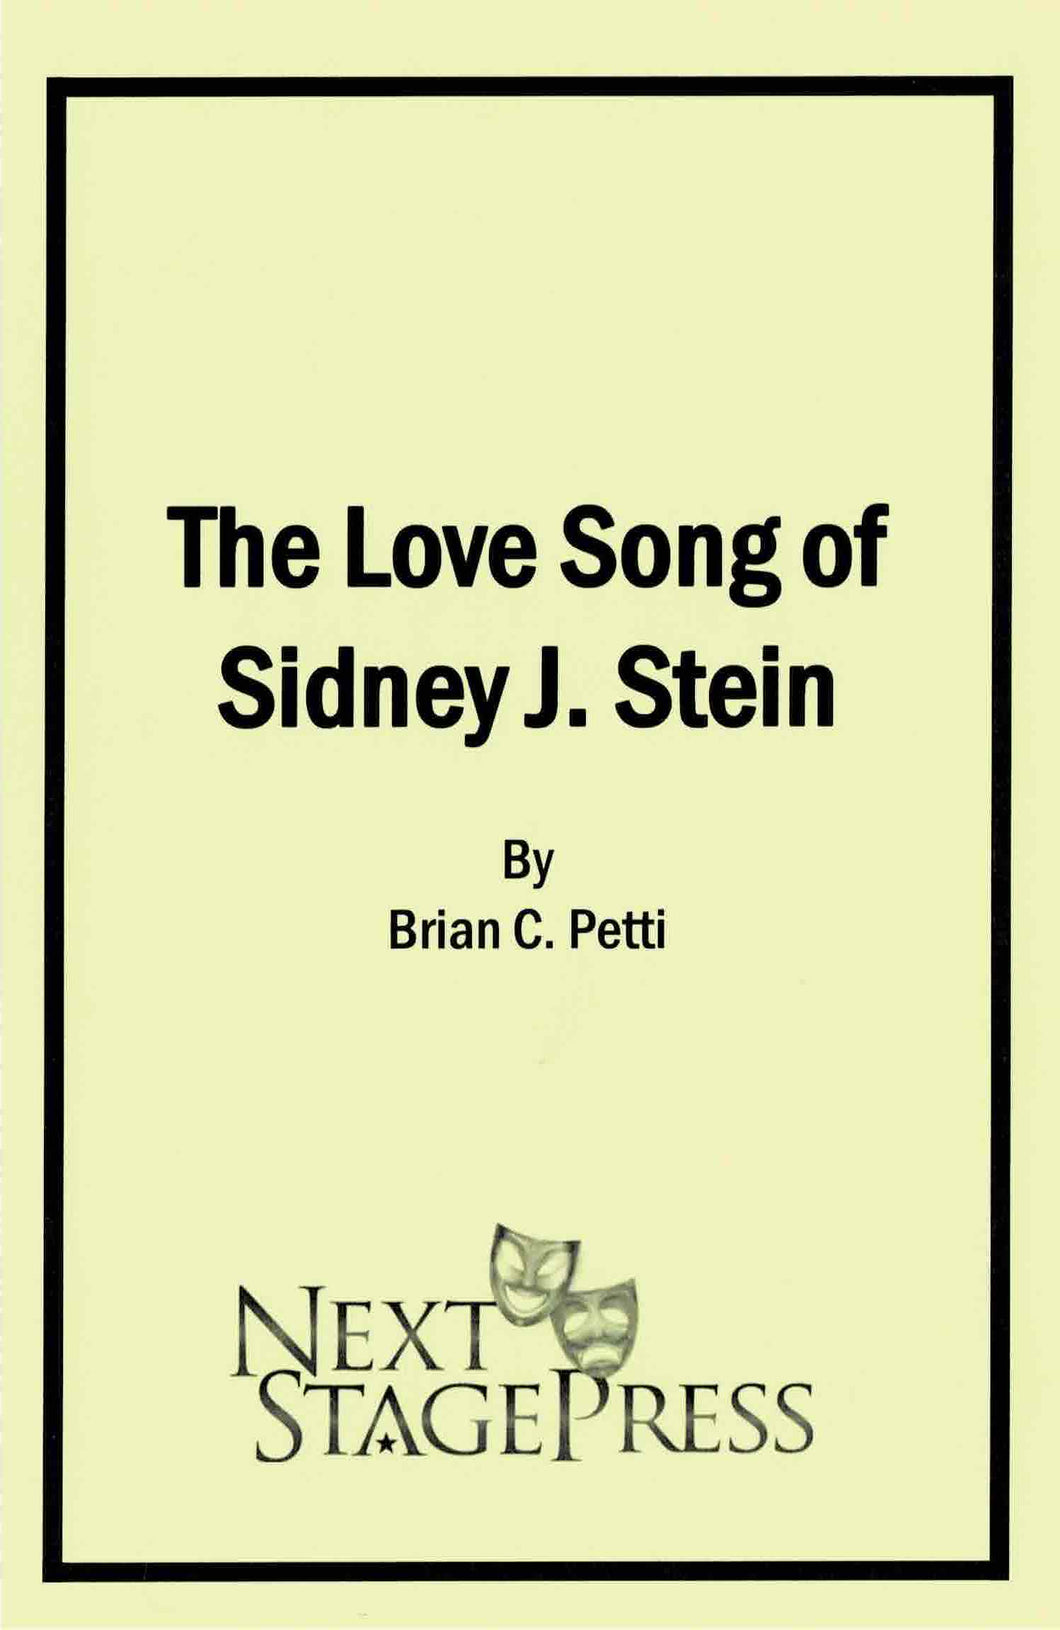 The Love Song of Sidney J. Stein